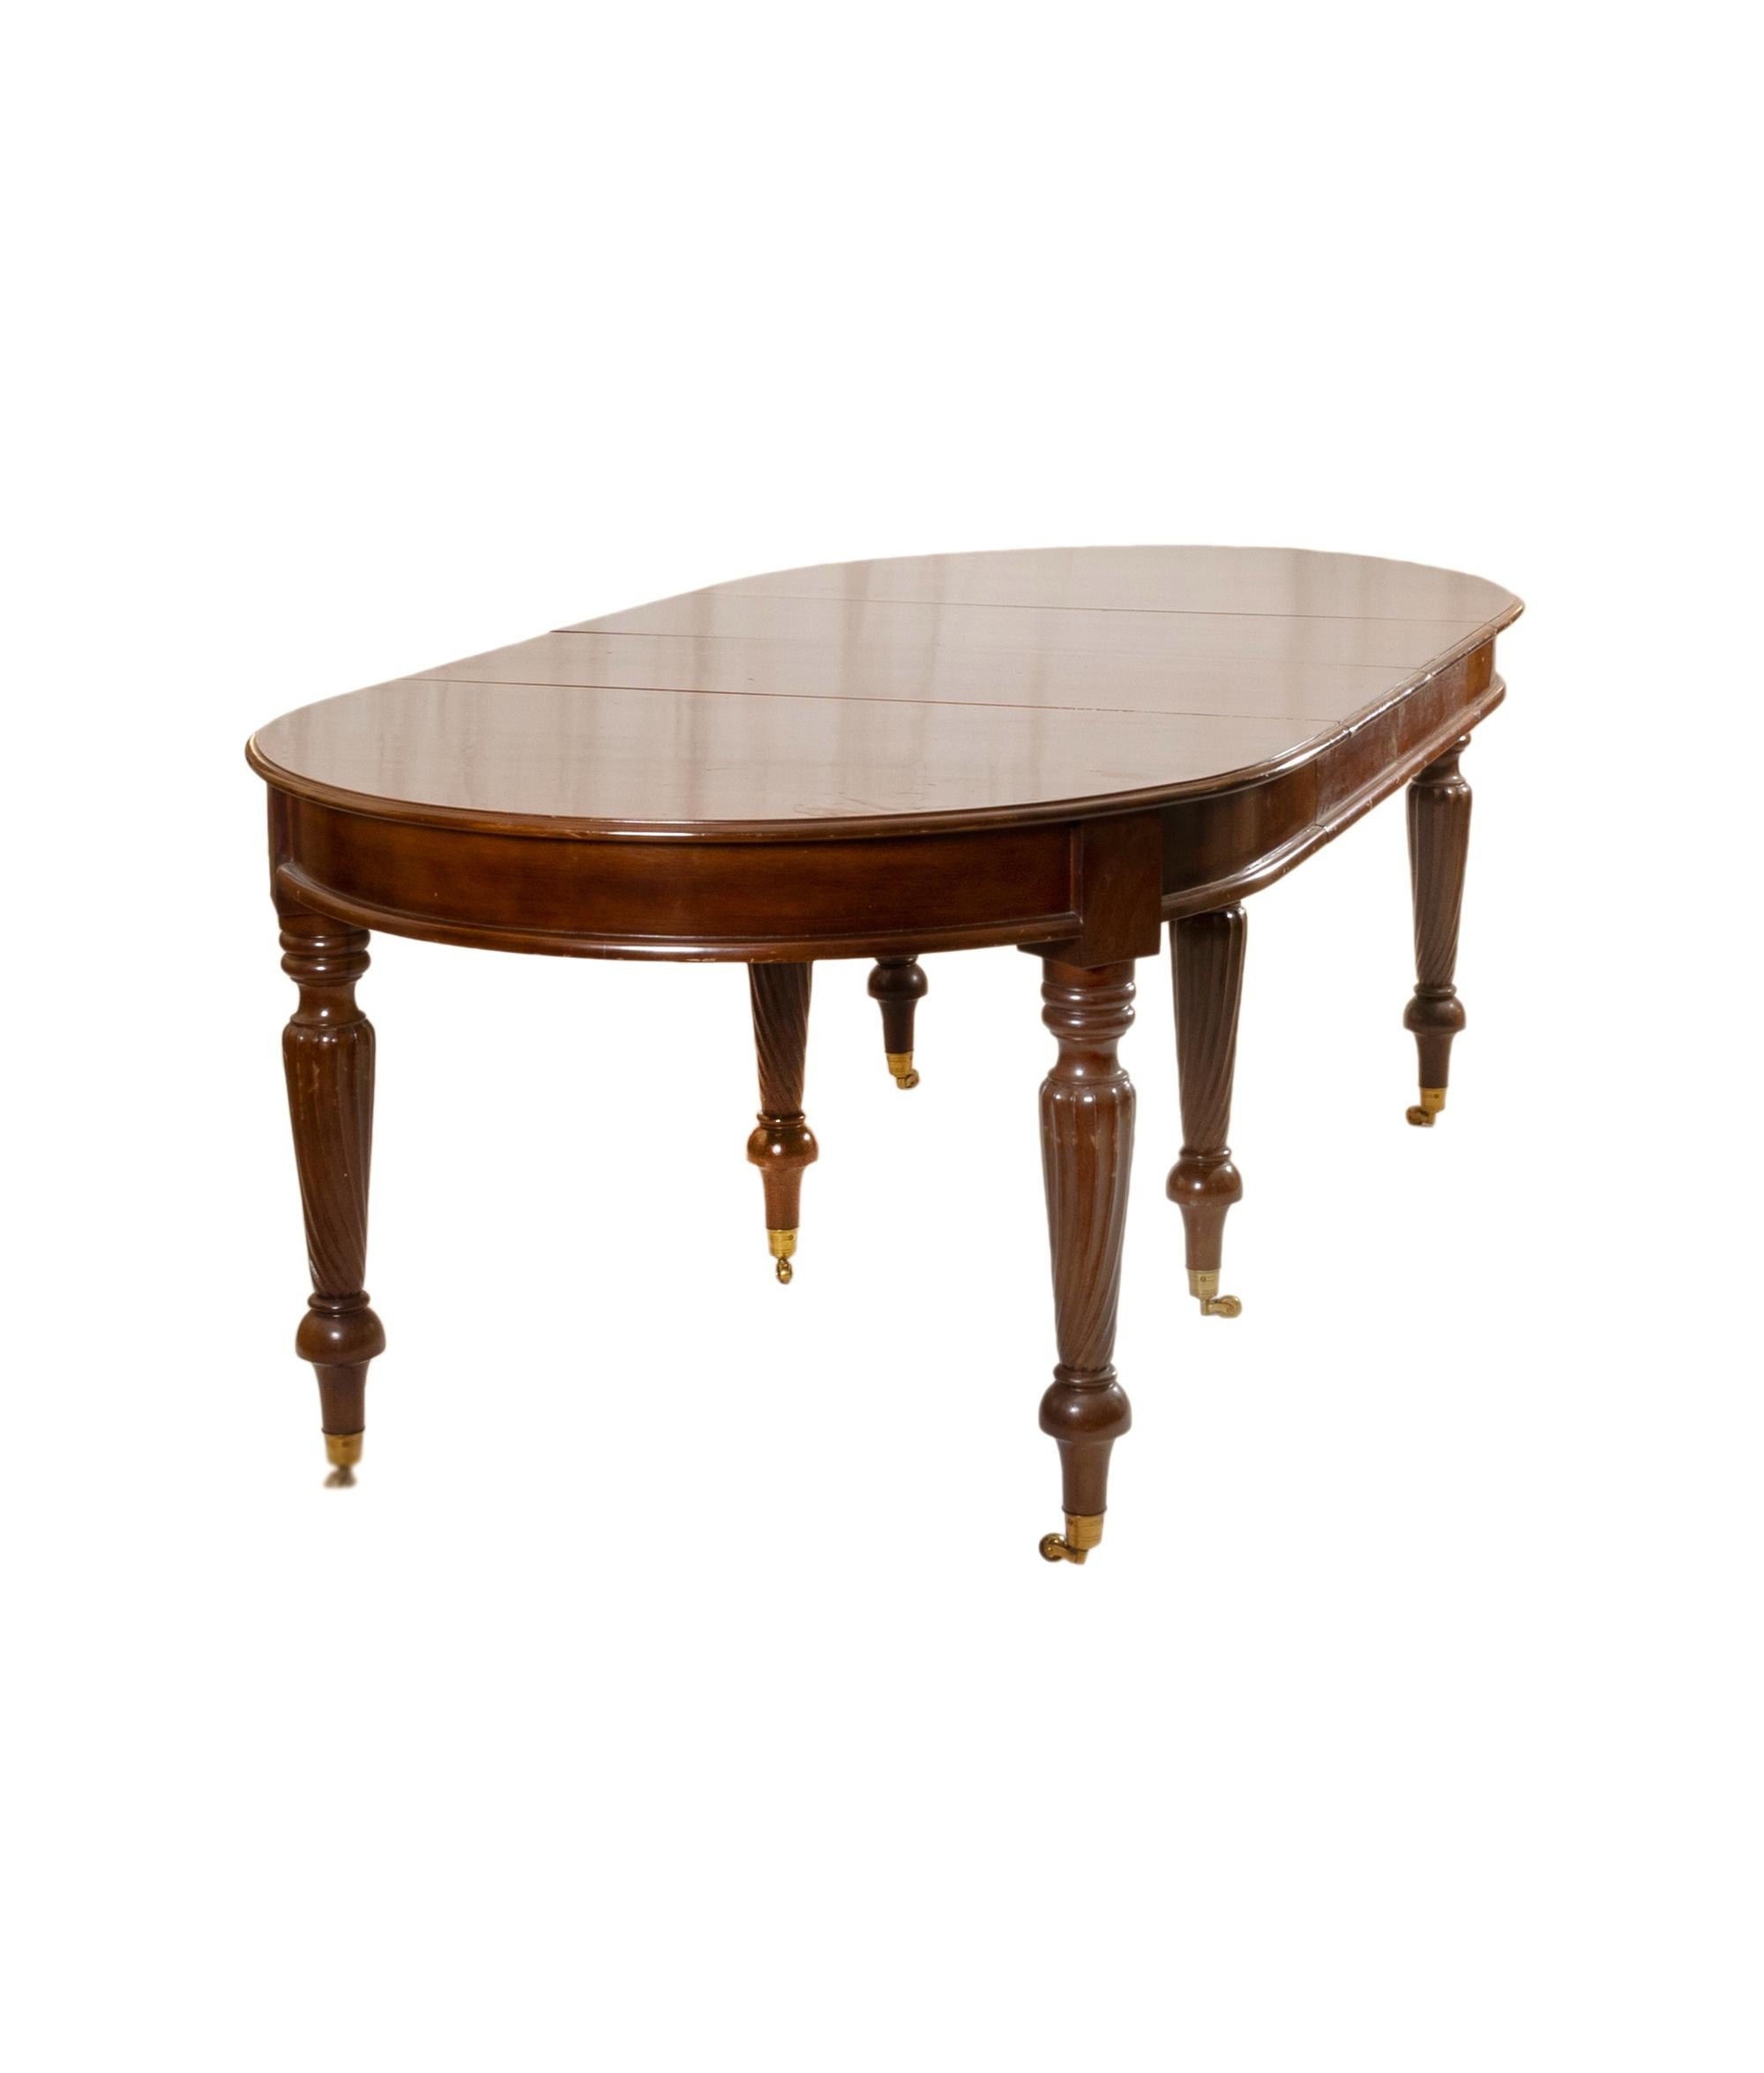 Metal Mahogany Dinning Table With Extensions, 19th Century For Sale